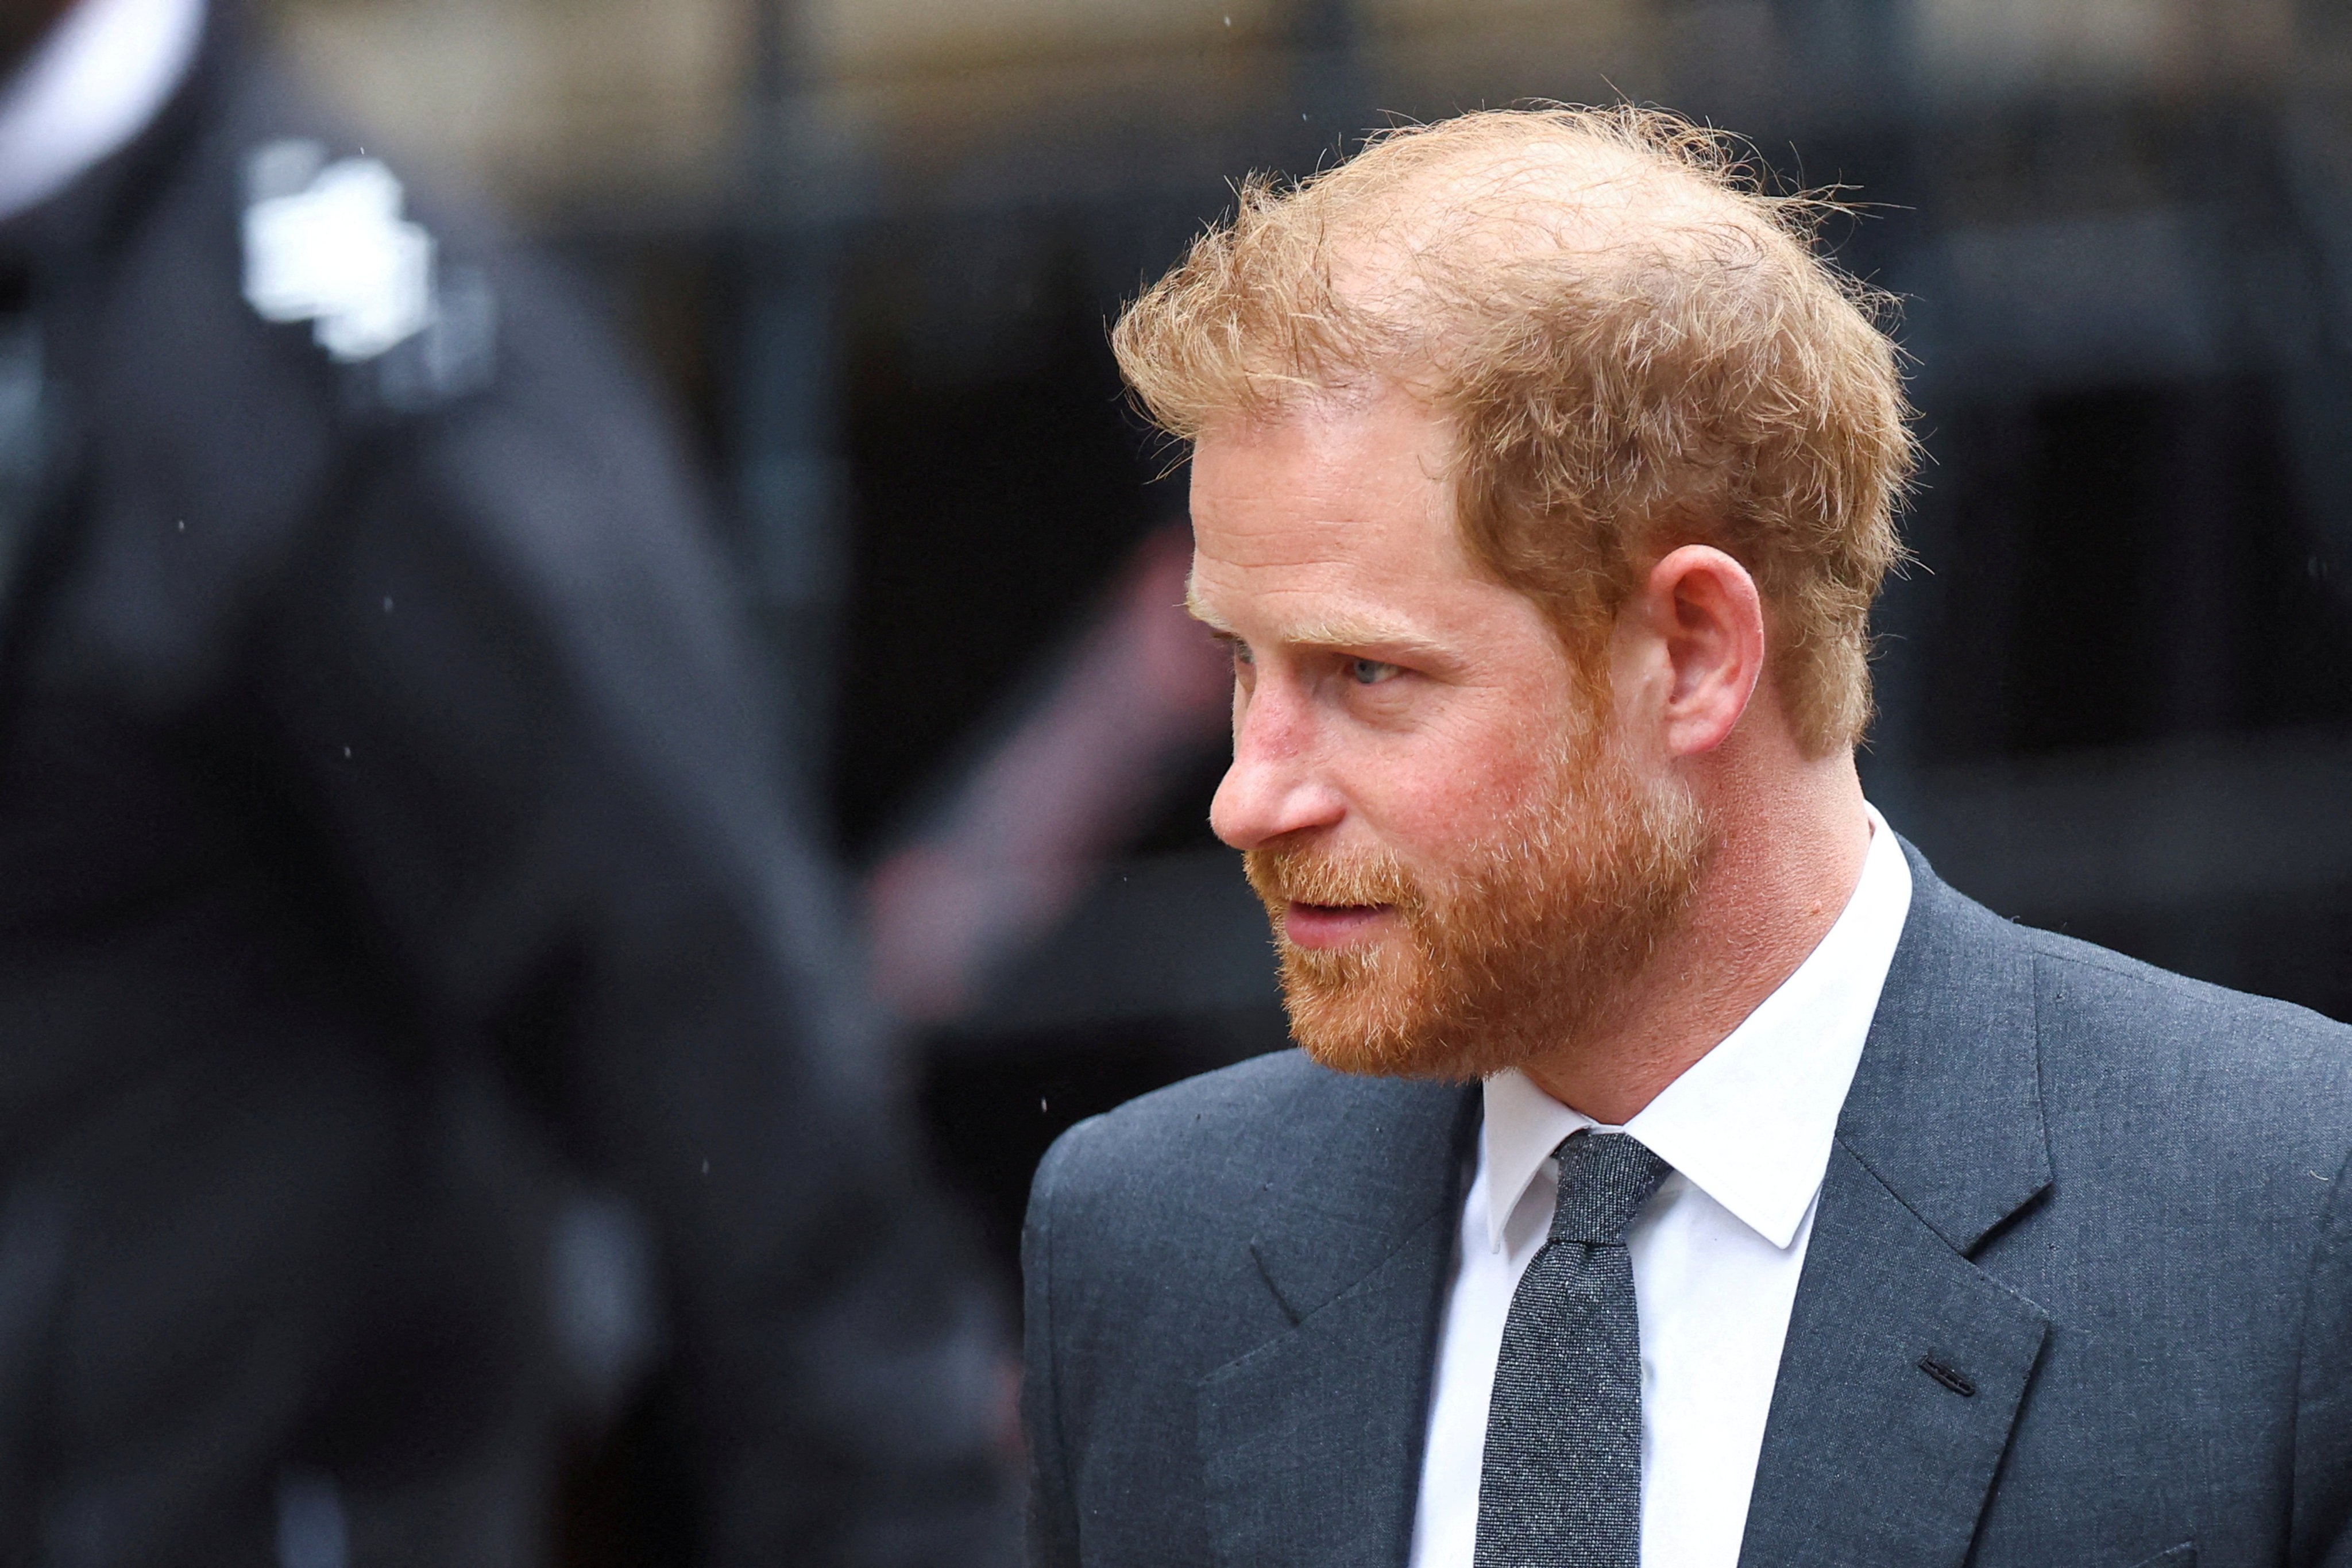 Prince Harry, who is among over 100 people suing a British newspaper group. File photo: Reuters